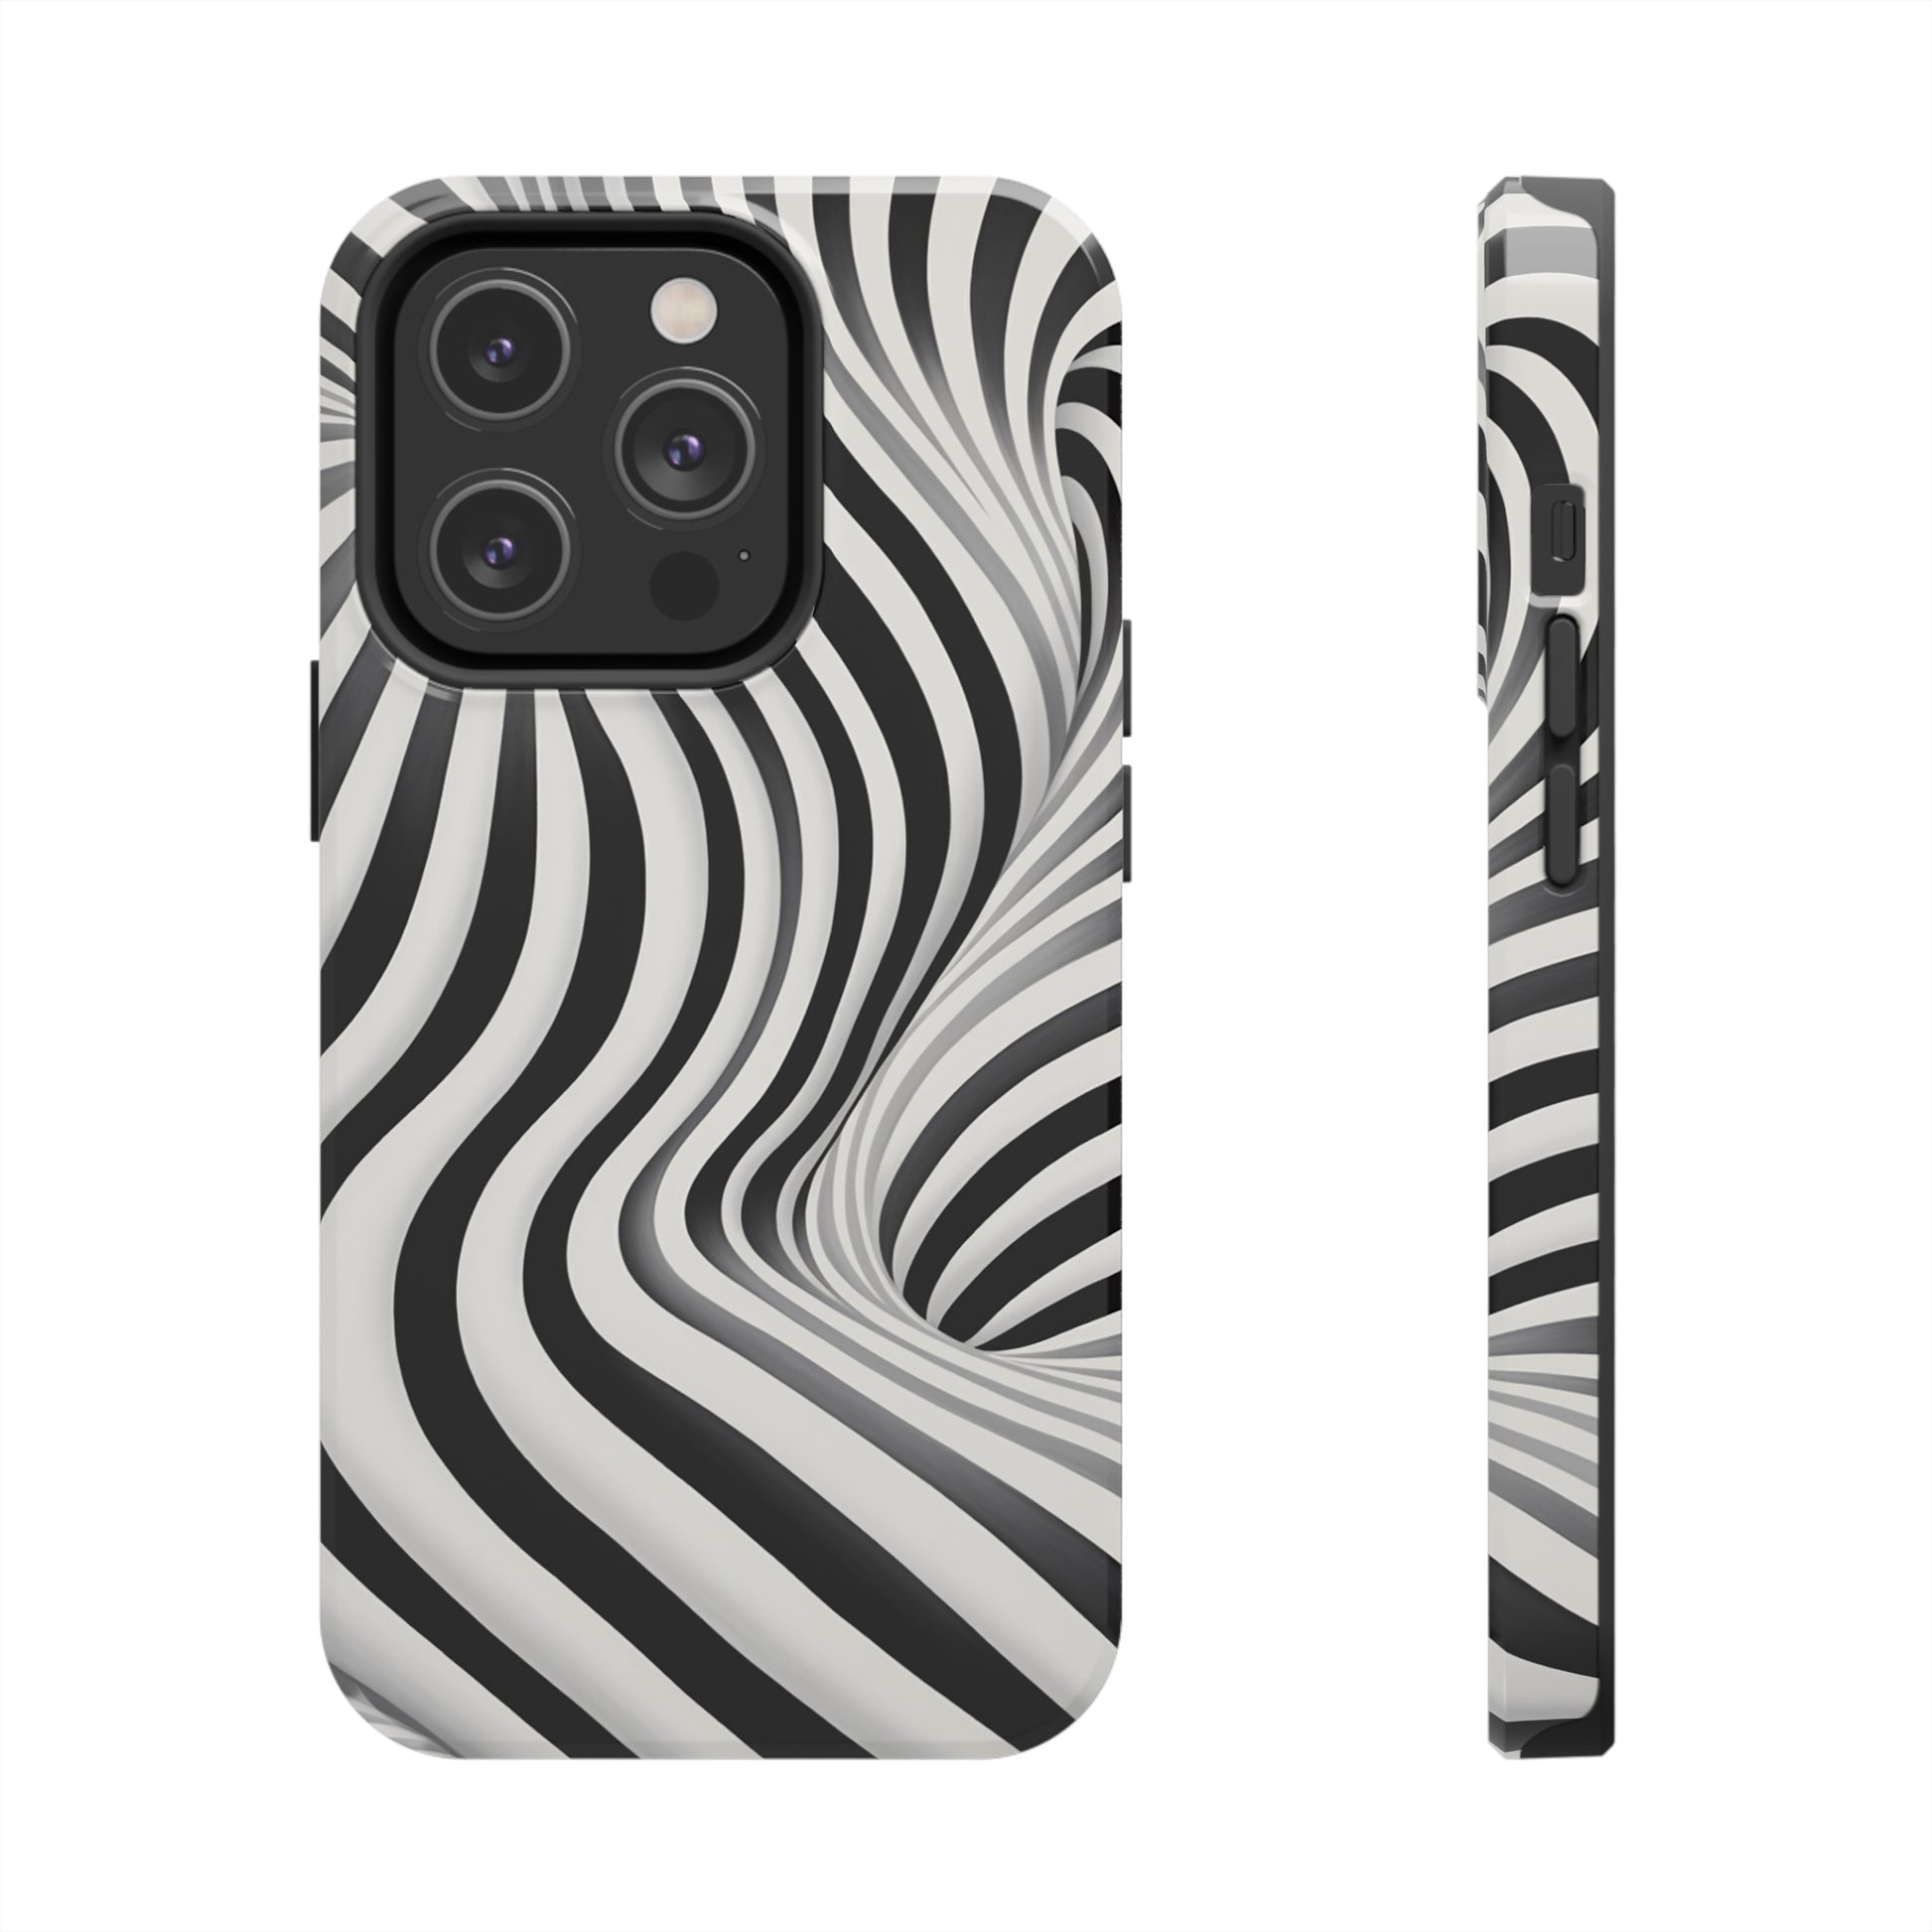 Protective and stylish iPhone 12 Pro Max Tough Case with mesmerizing design